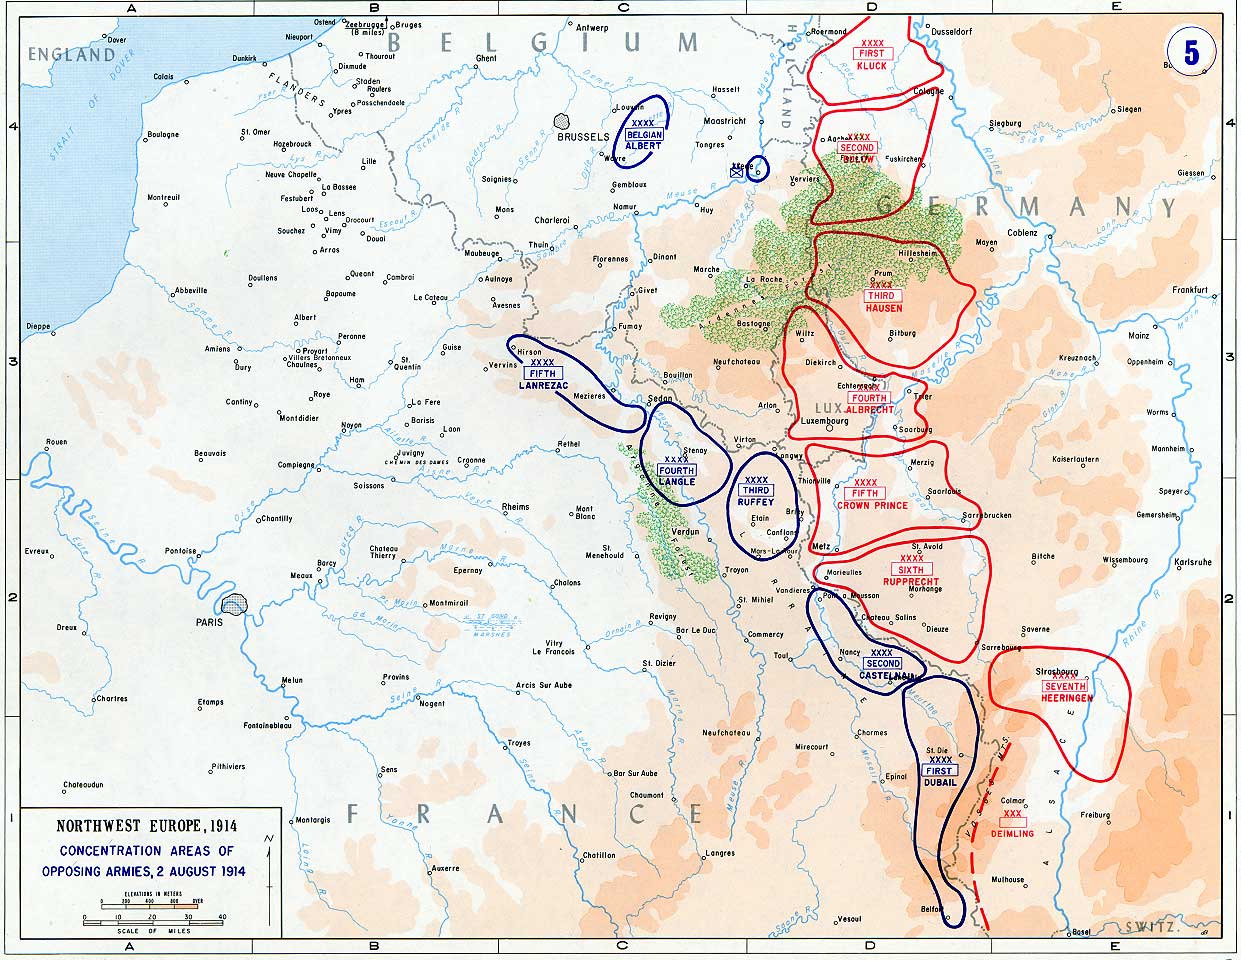 Deployments in the West, August 1914